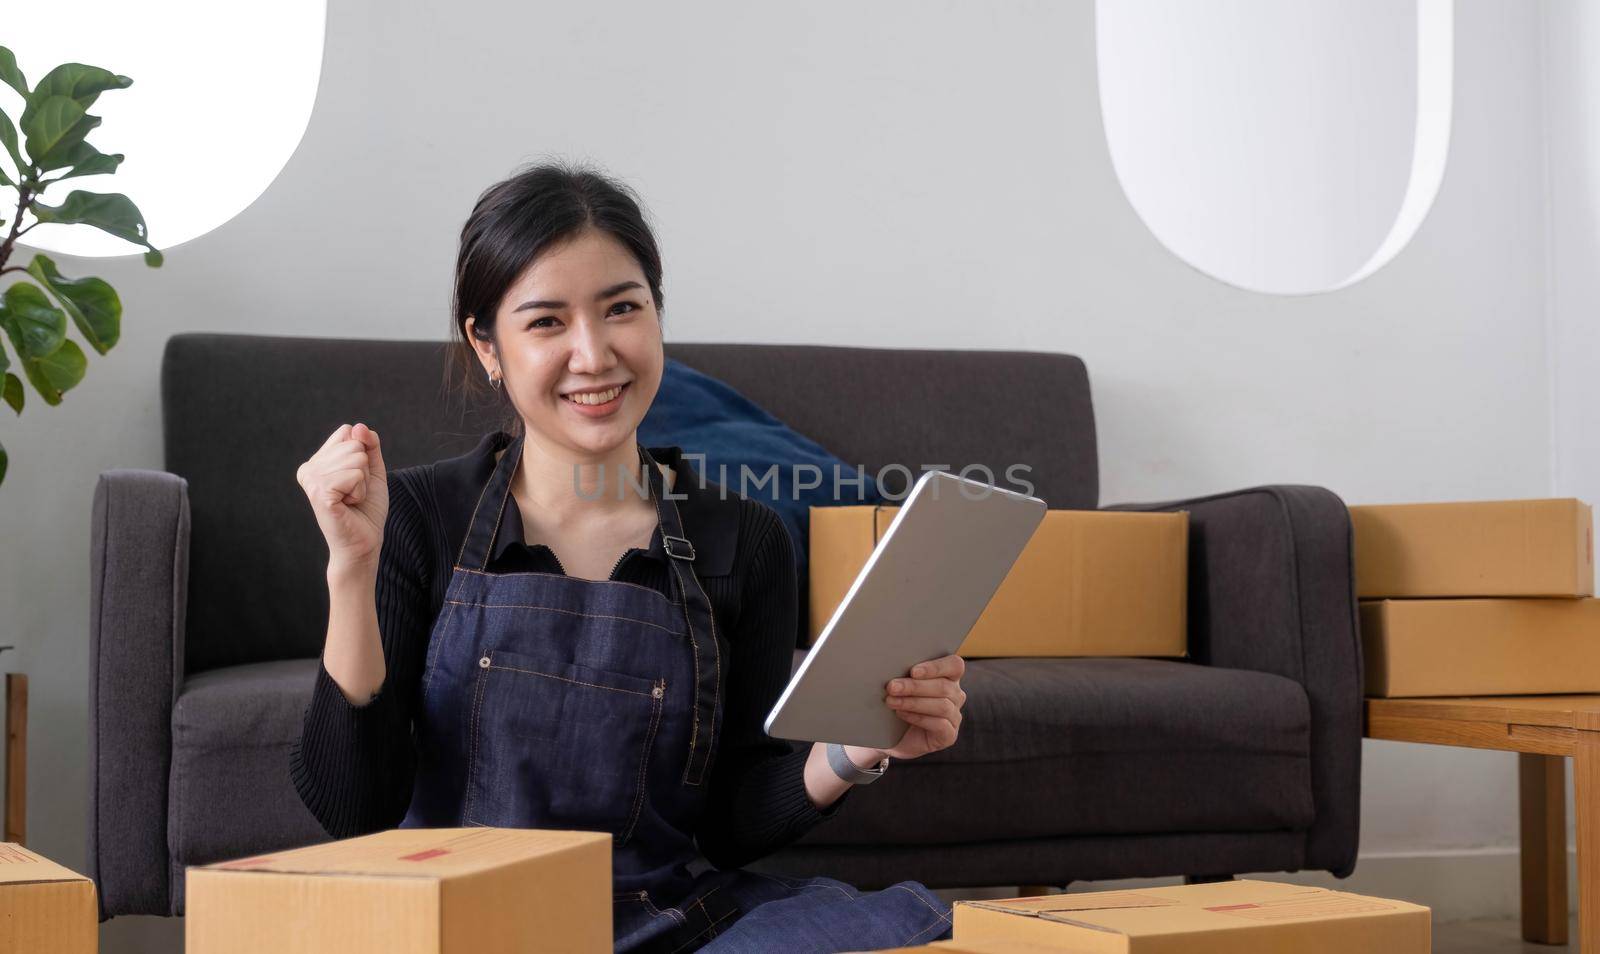 Startup SME small business entrepreneur of freelance Asian woman using a laptop with box Cheerful succes marketing packaging box and delivery SME idea concept.